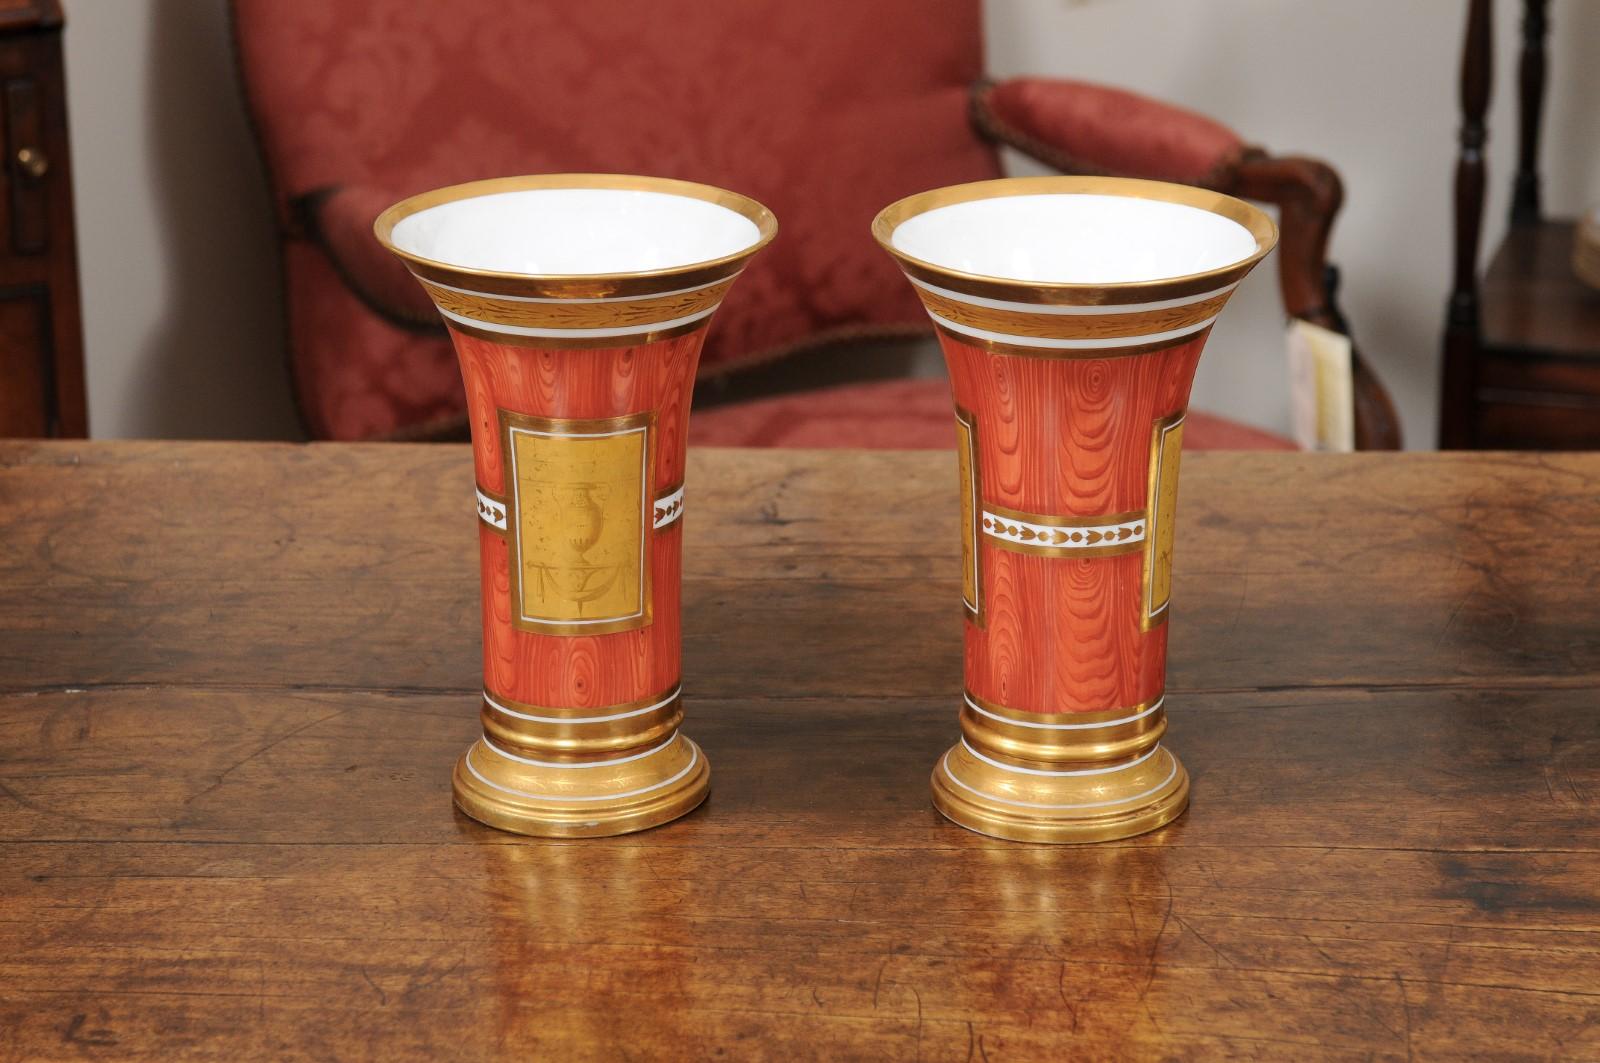 Pair of Continental Orange Faux Bois & Gilt Vases with Neoclassical Motif, Early 19th Century